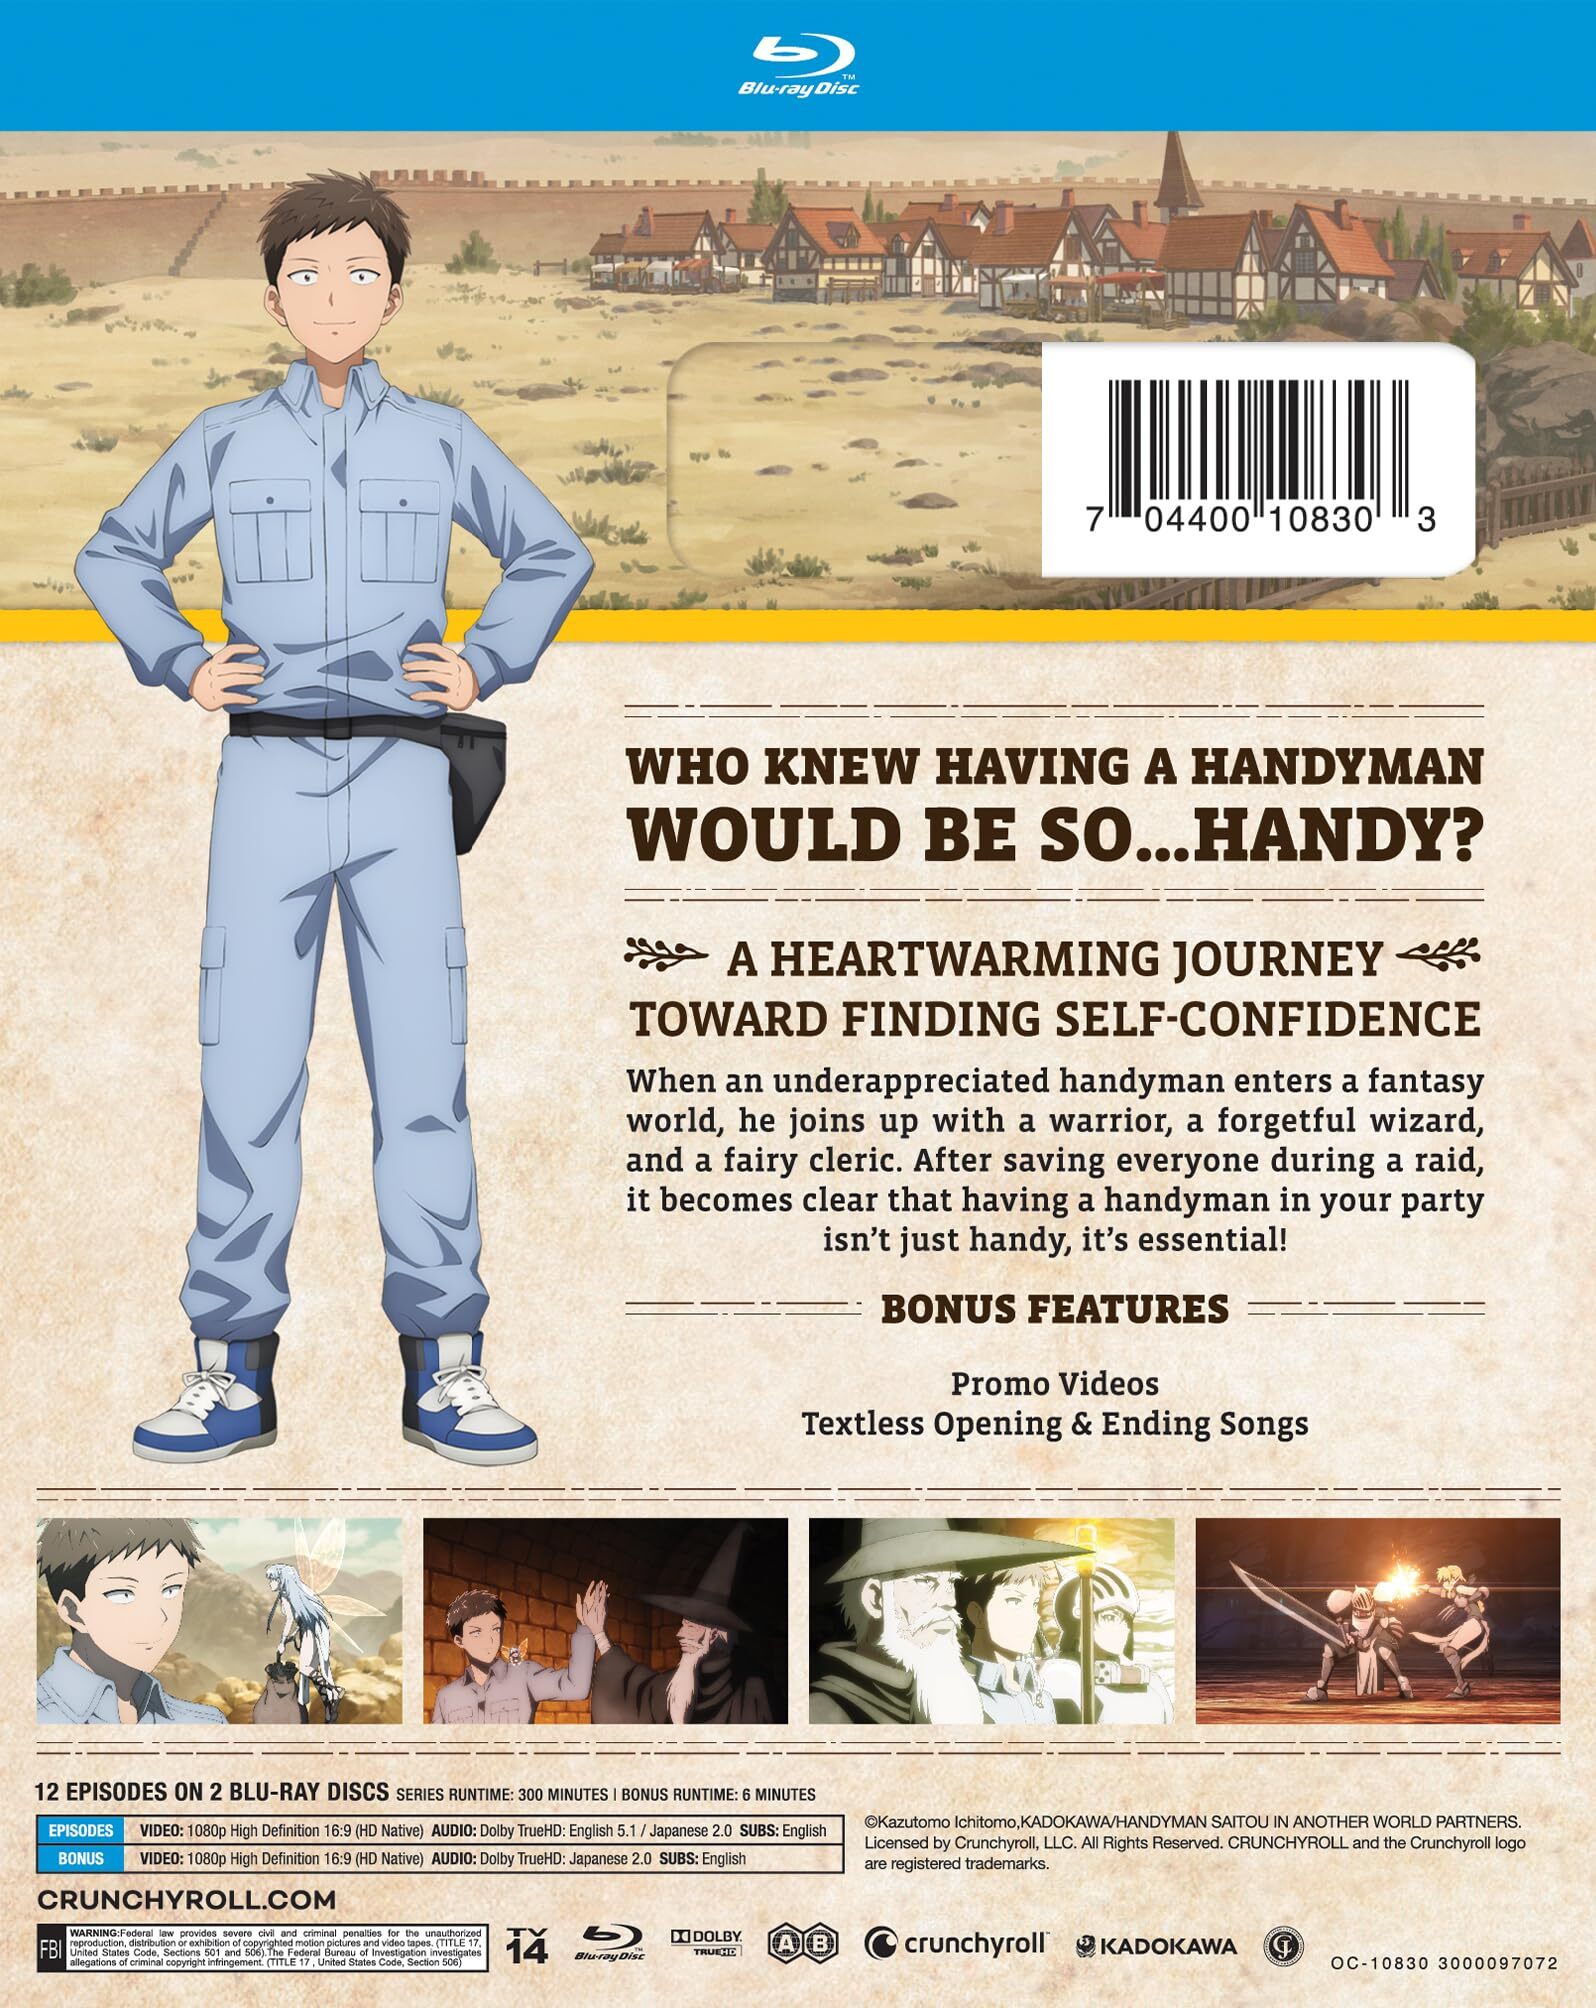 Buy Handyman Saitou in Another World DVD - $14.99 at